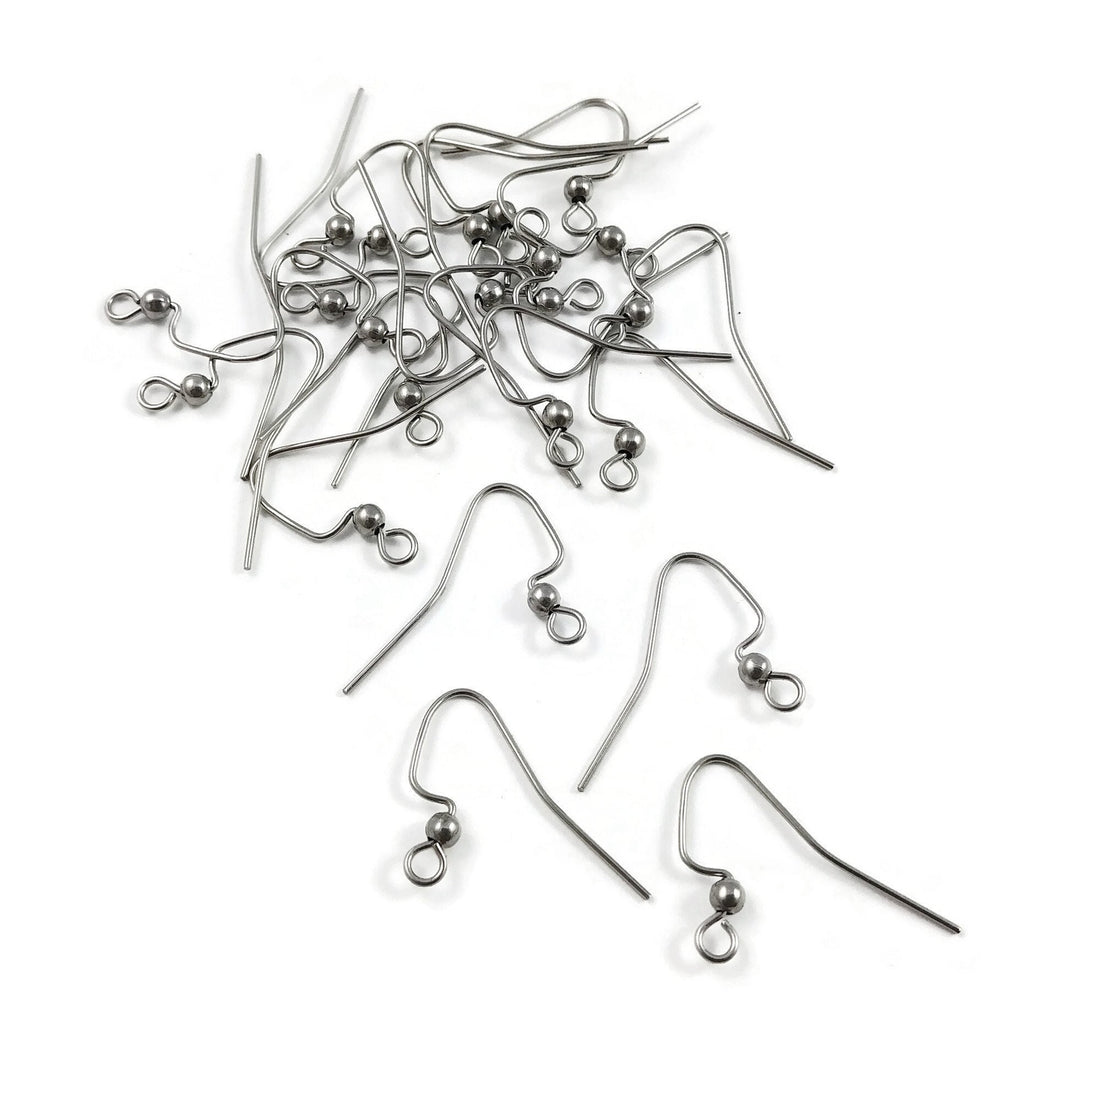 Menkey 925 Sterling Silver Earring Hooks 120 Pcs/60 Pairs, Ear Wires Fish Hooks, Hypo-Allergenic Jewelry Findings Parts with 120 Pcs Clear Silicone